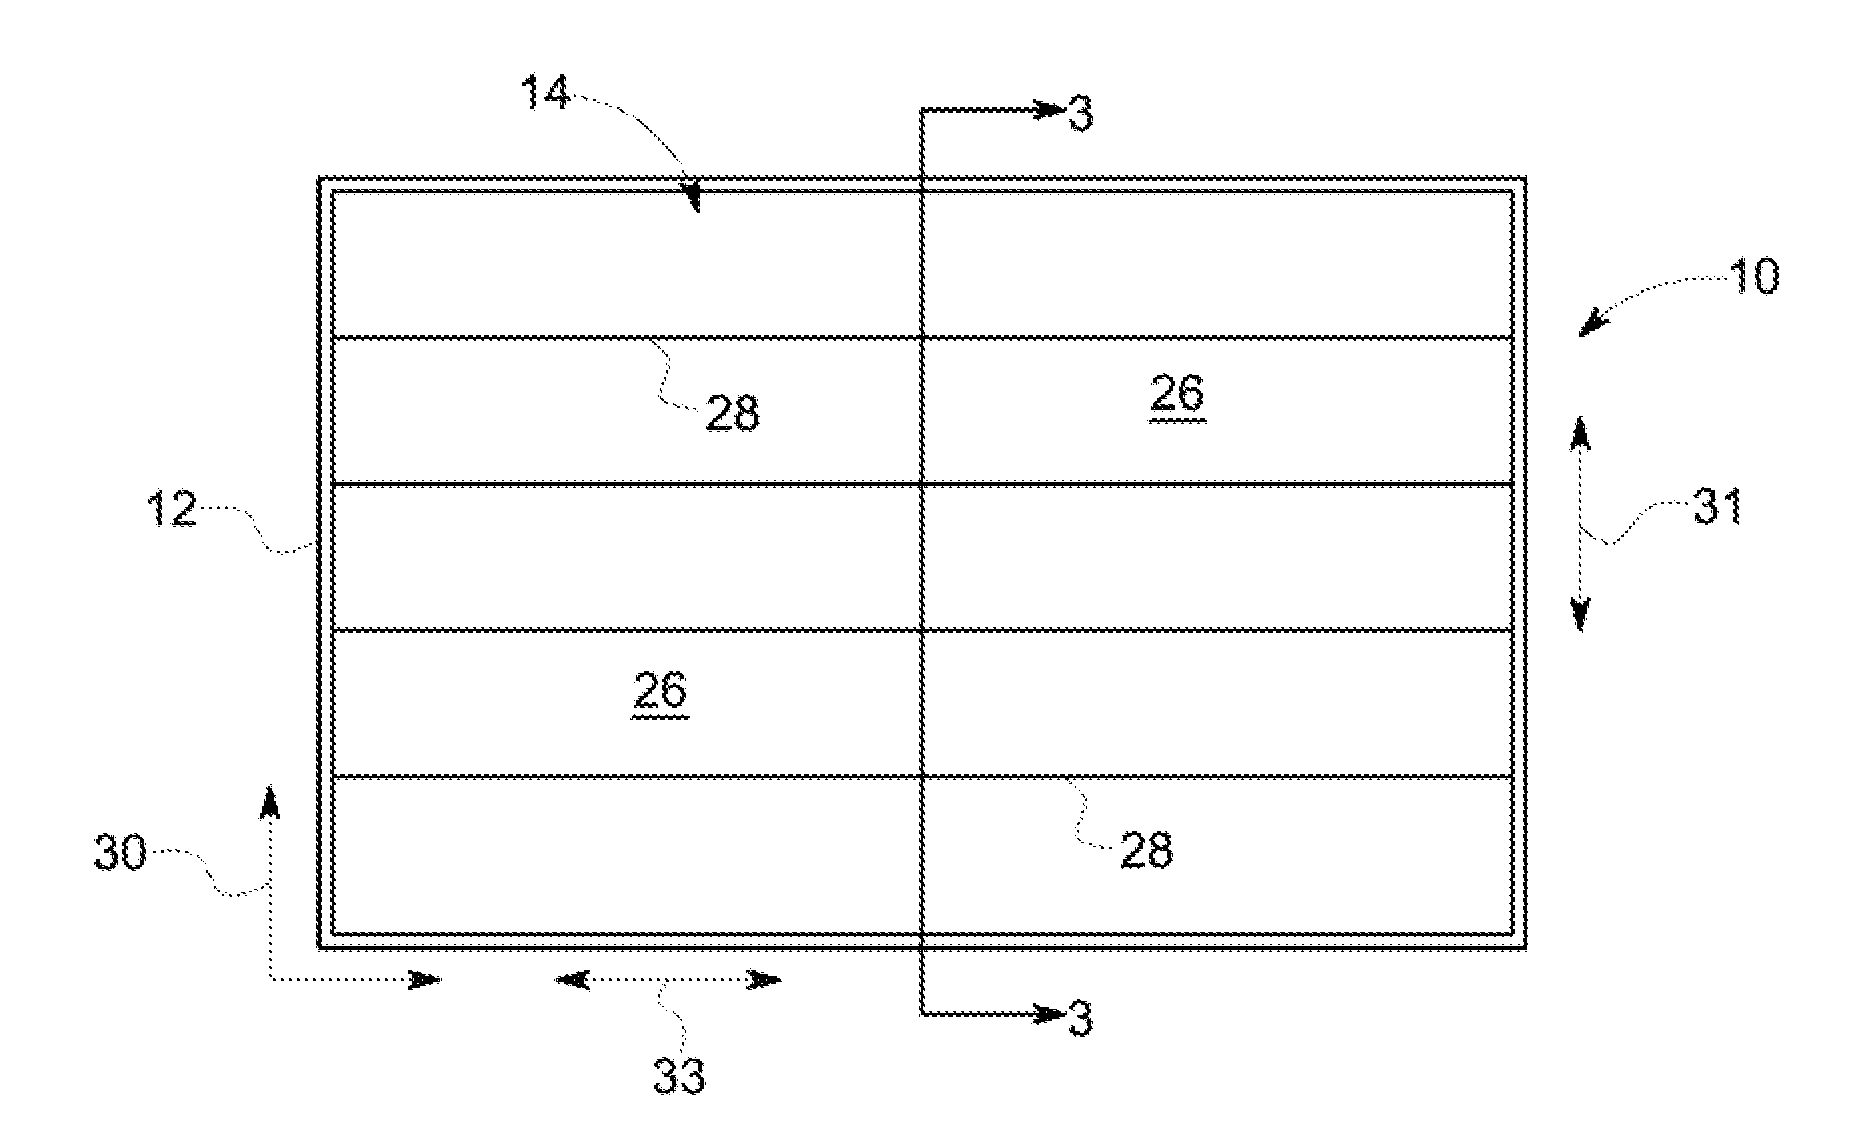 Multi-structure cathode for flexible organic light emitting diode (OLED) device and method of making same